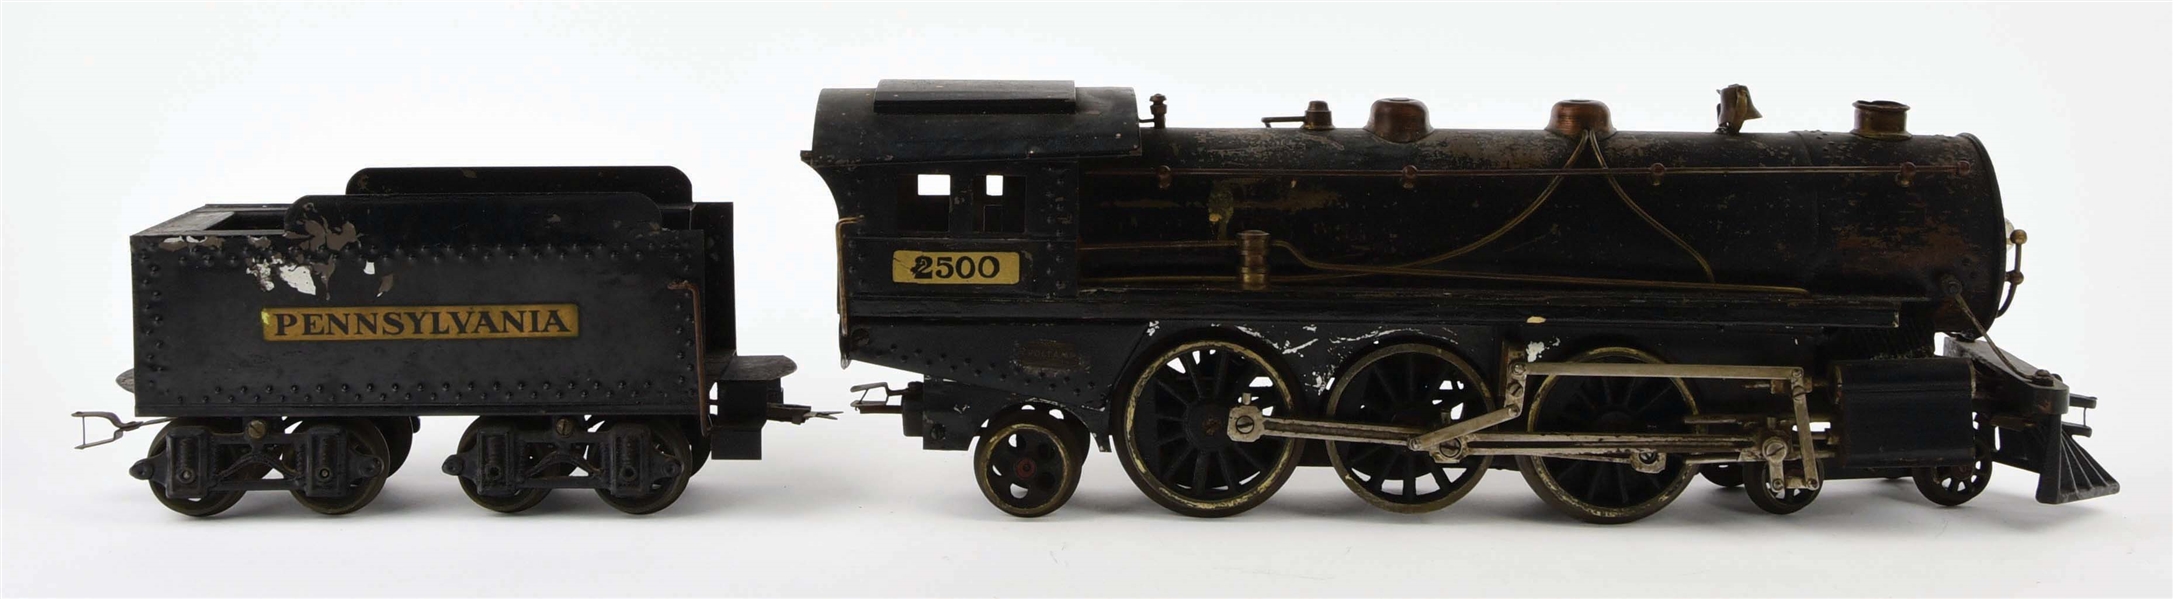 PRE-WAR VOLTAMP LARGE 2500 STEAM ENGINE AND MATCHING PENNSYLVANIA TENDER.